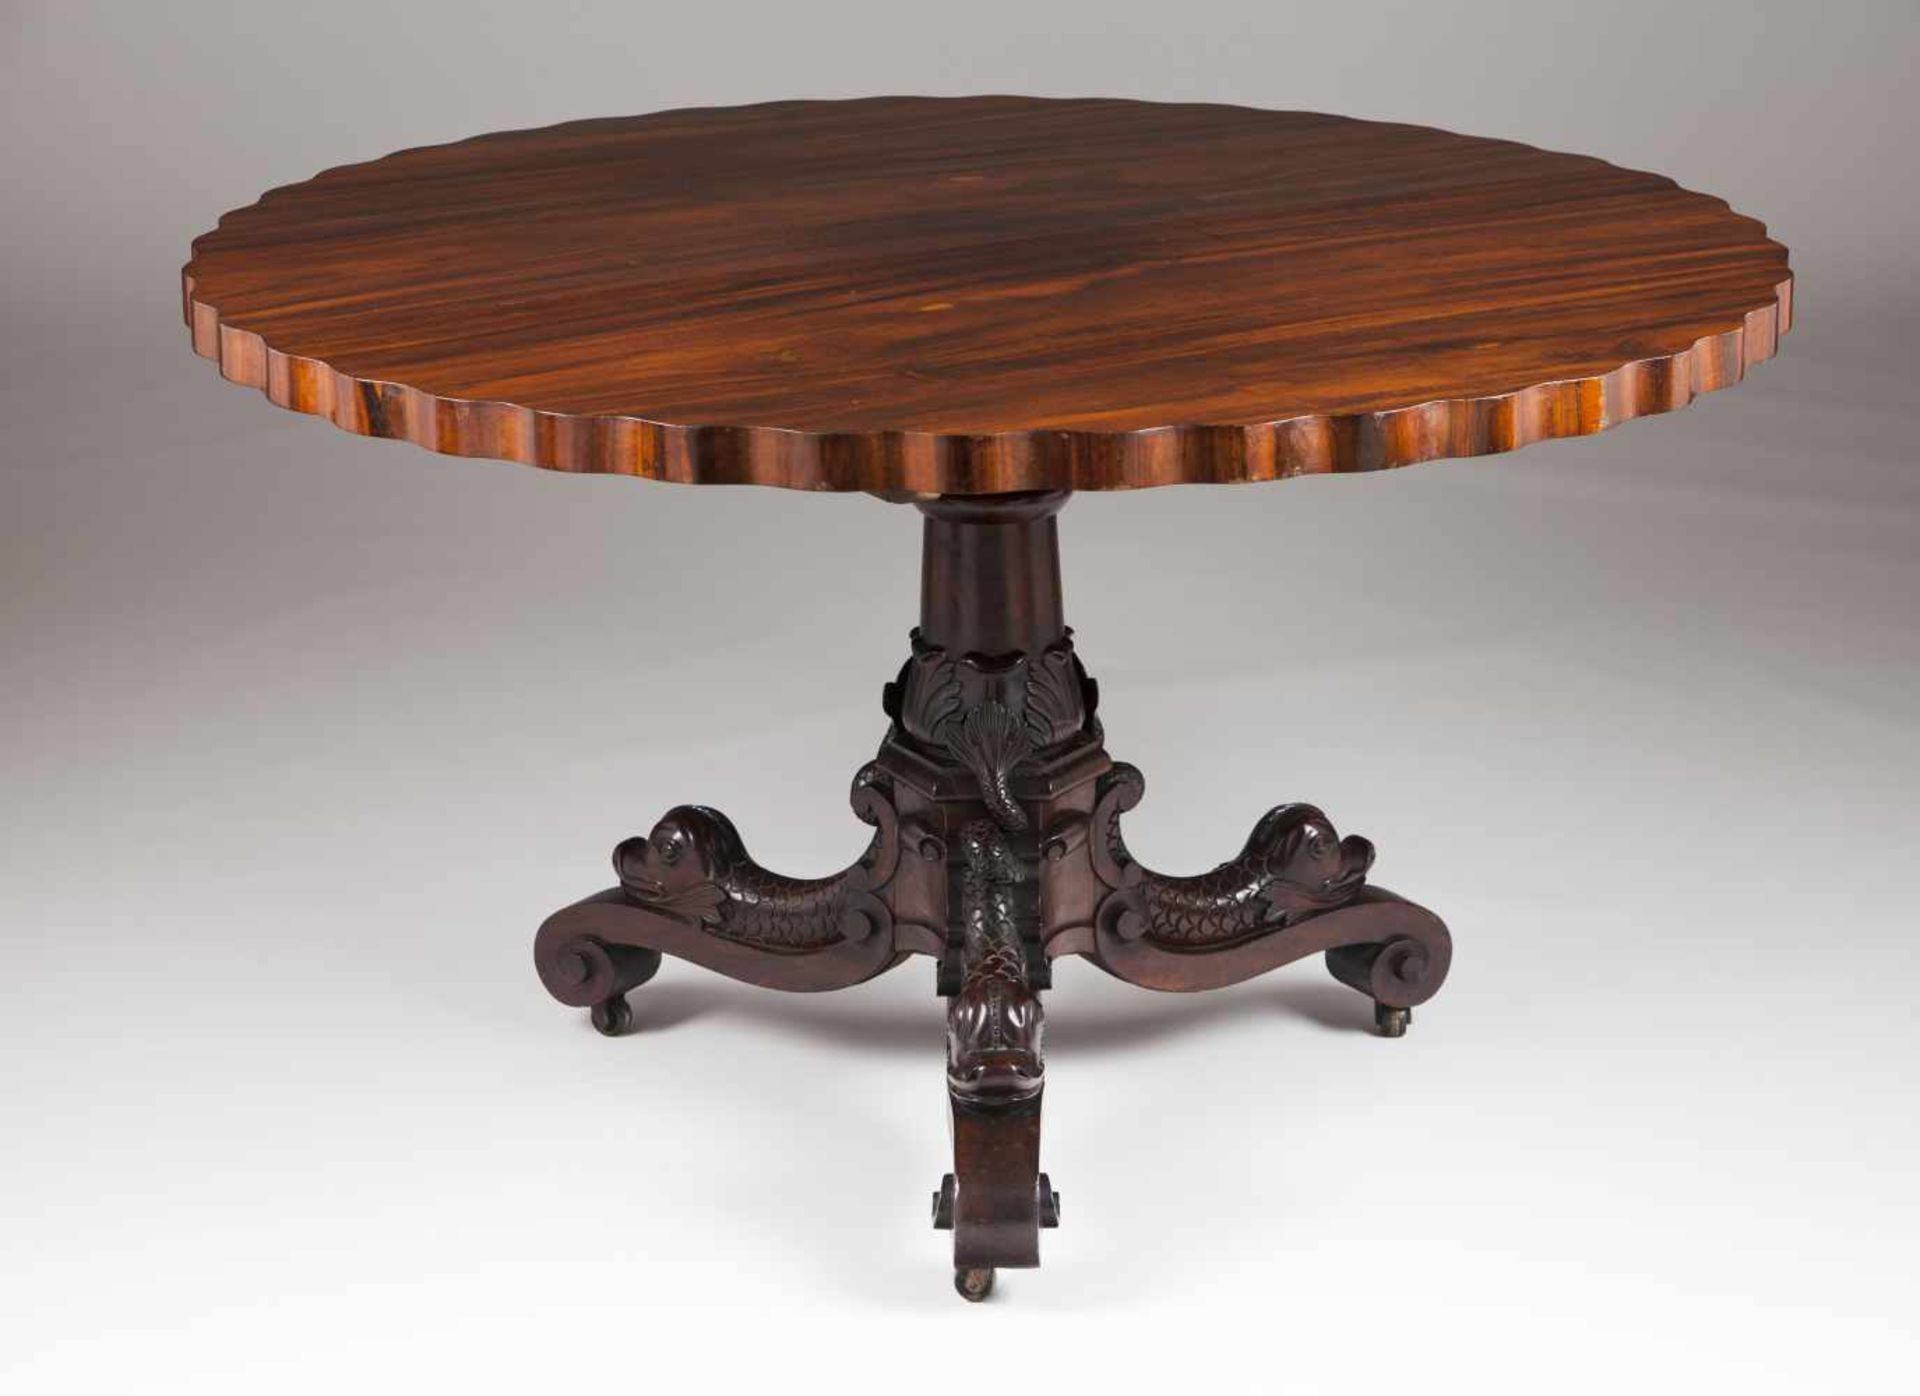 A breakfast tableRosewoodScalloped tilt-topCentral pedestal on three dolphin shaped fee